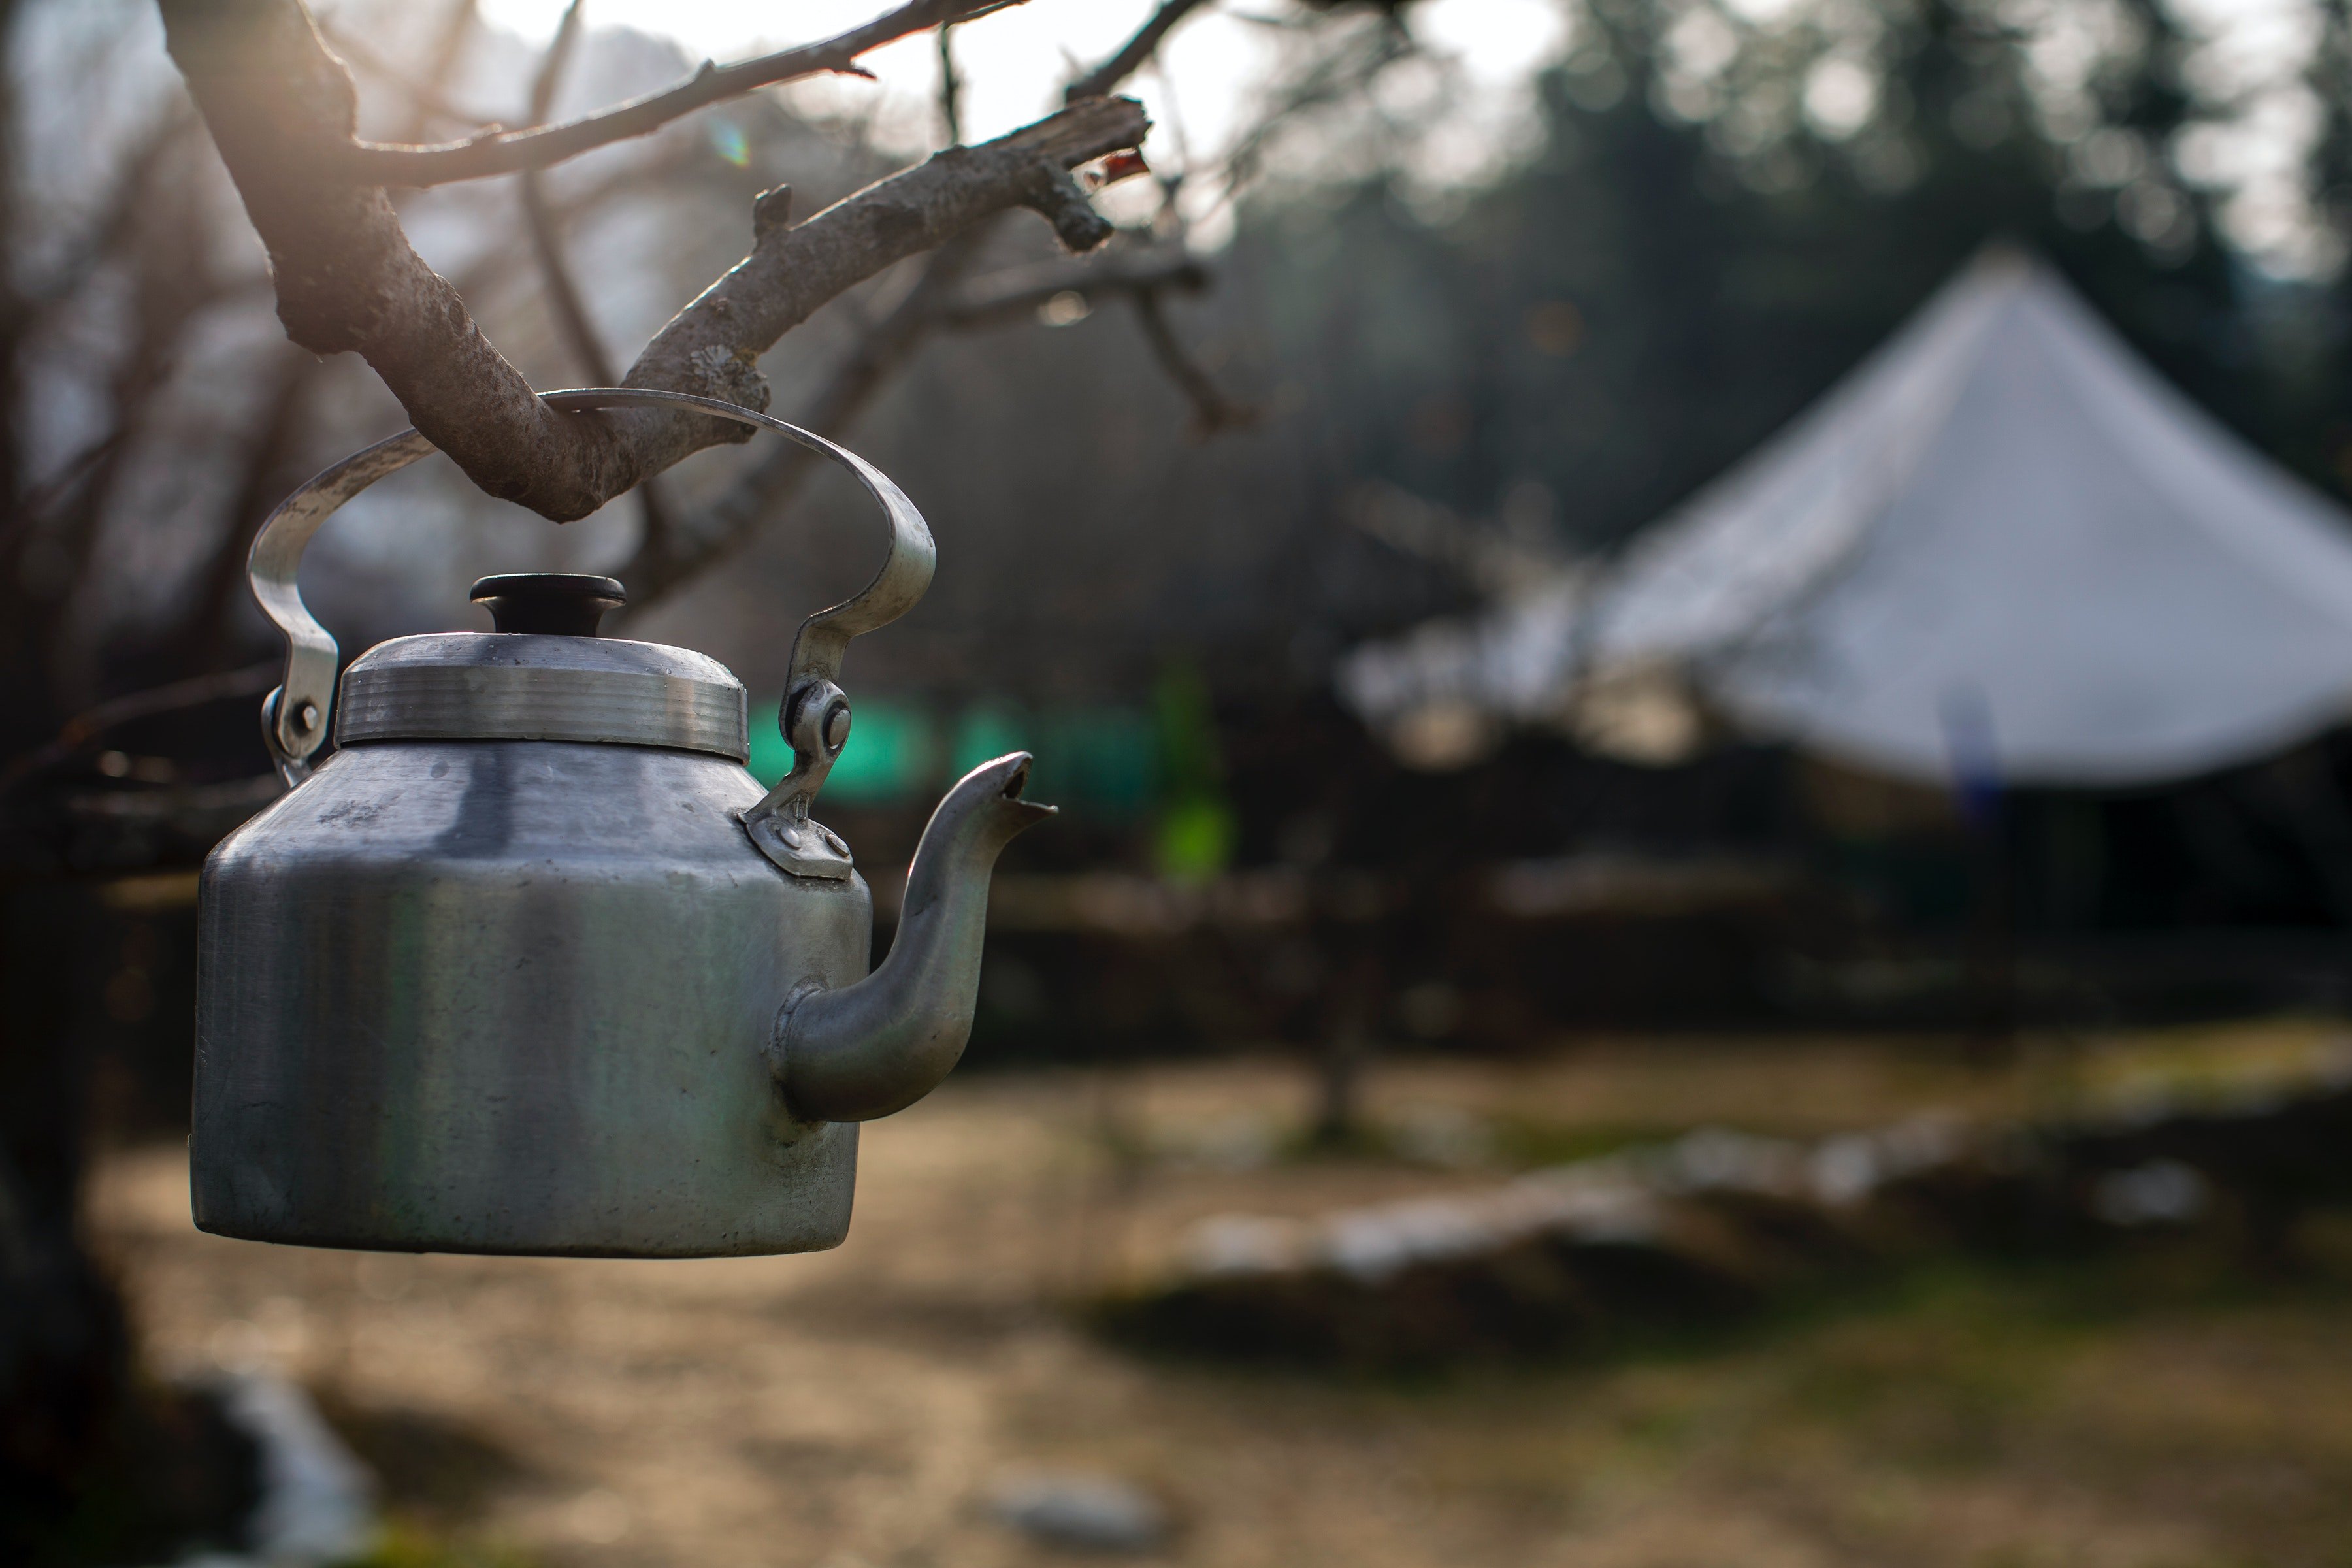 An image of a kettle | Photo: Pexels